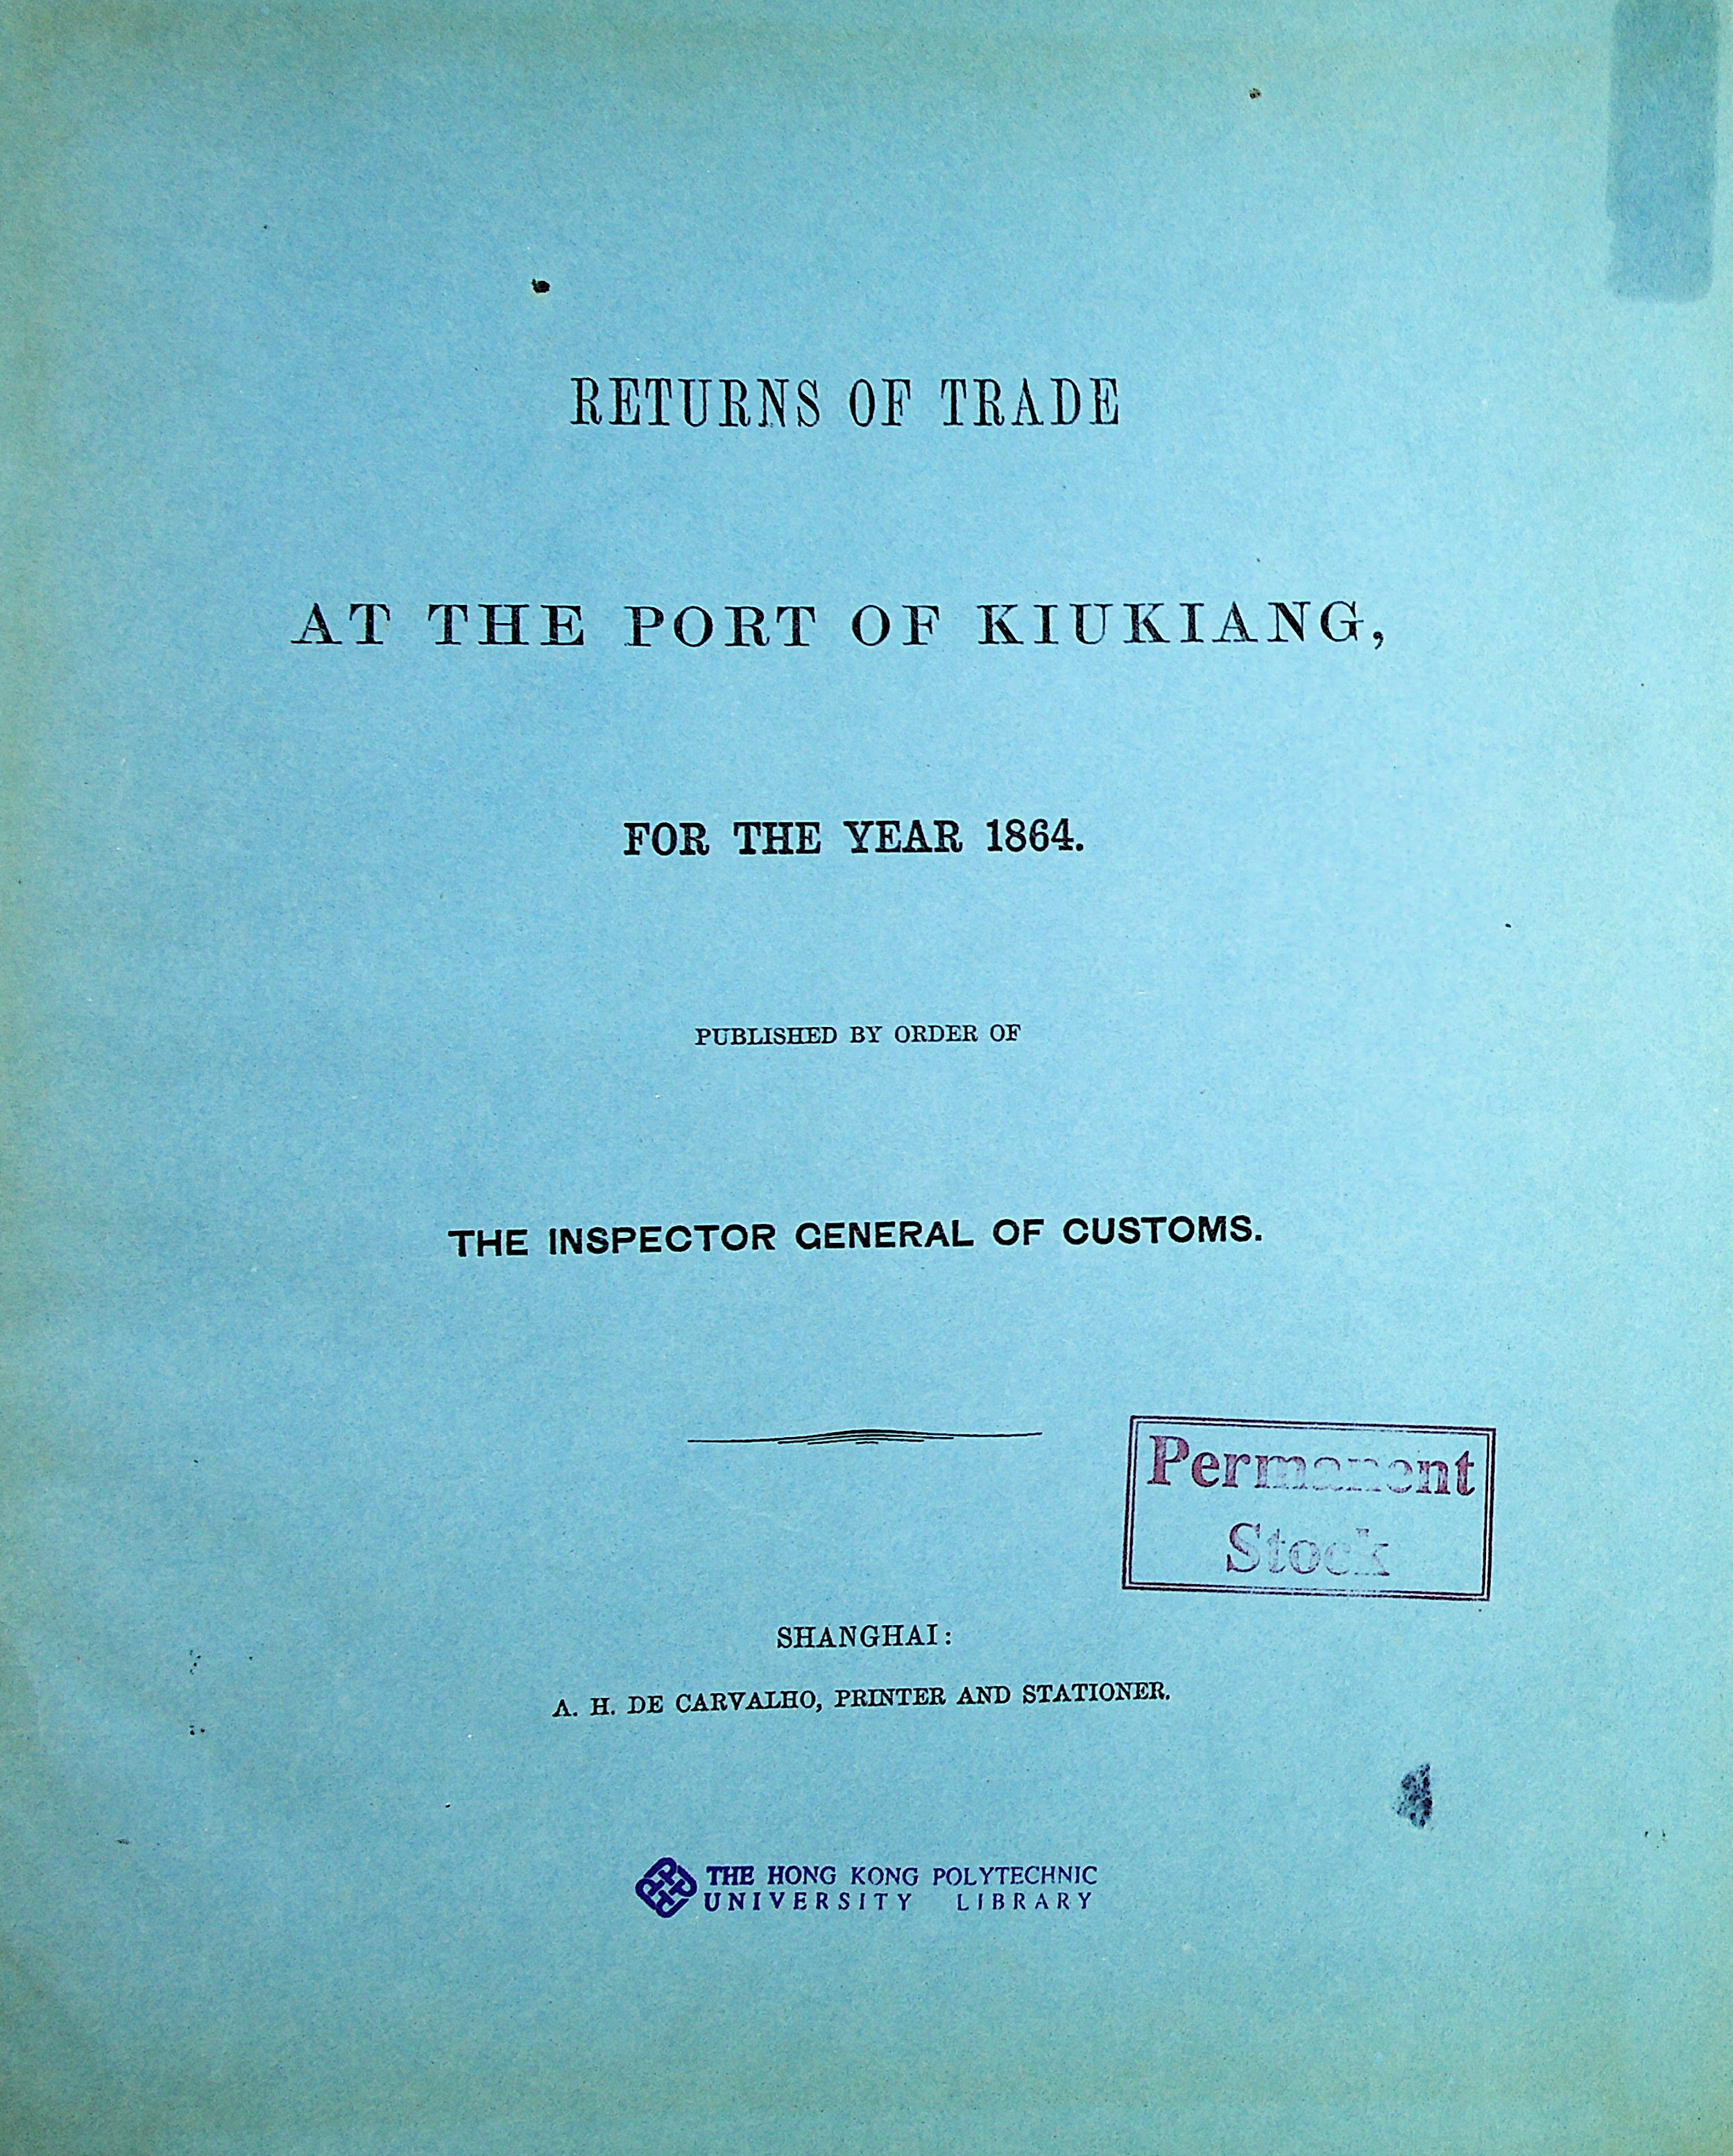 Returns of trade at the port of Kiukiang, for the year 1864